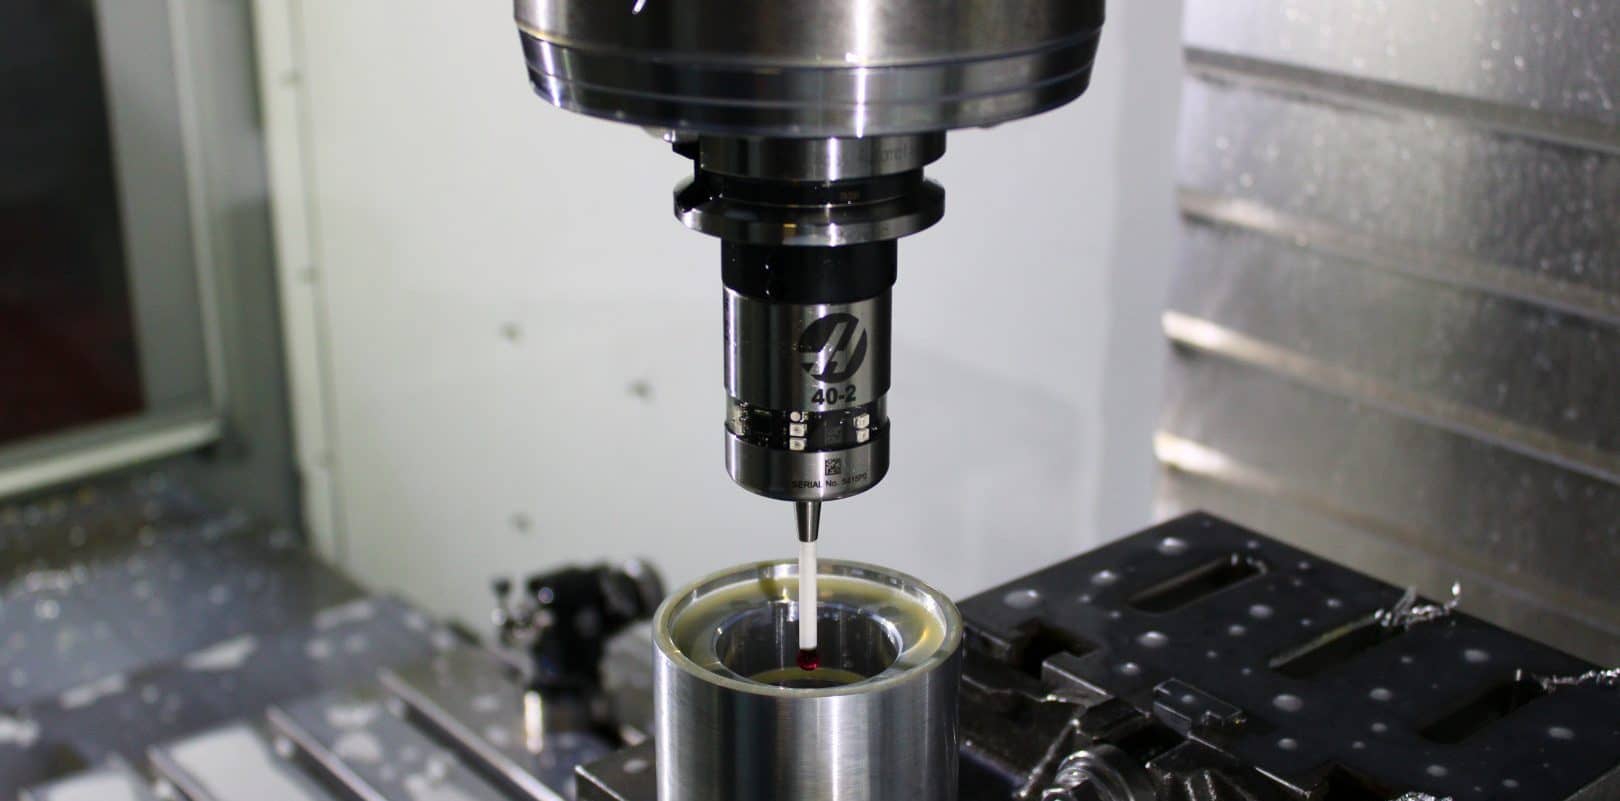 CNC Manufacture of a Food and Beverage Industry Component